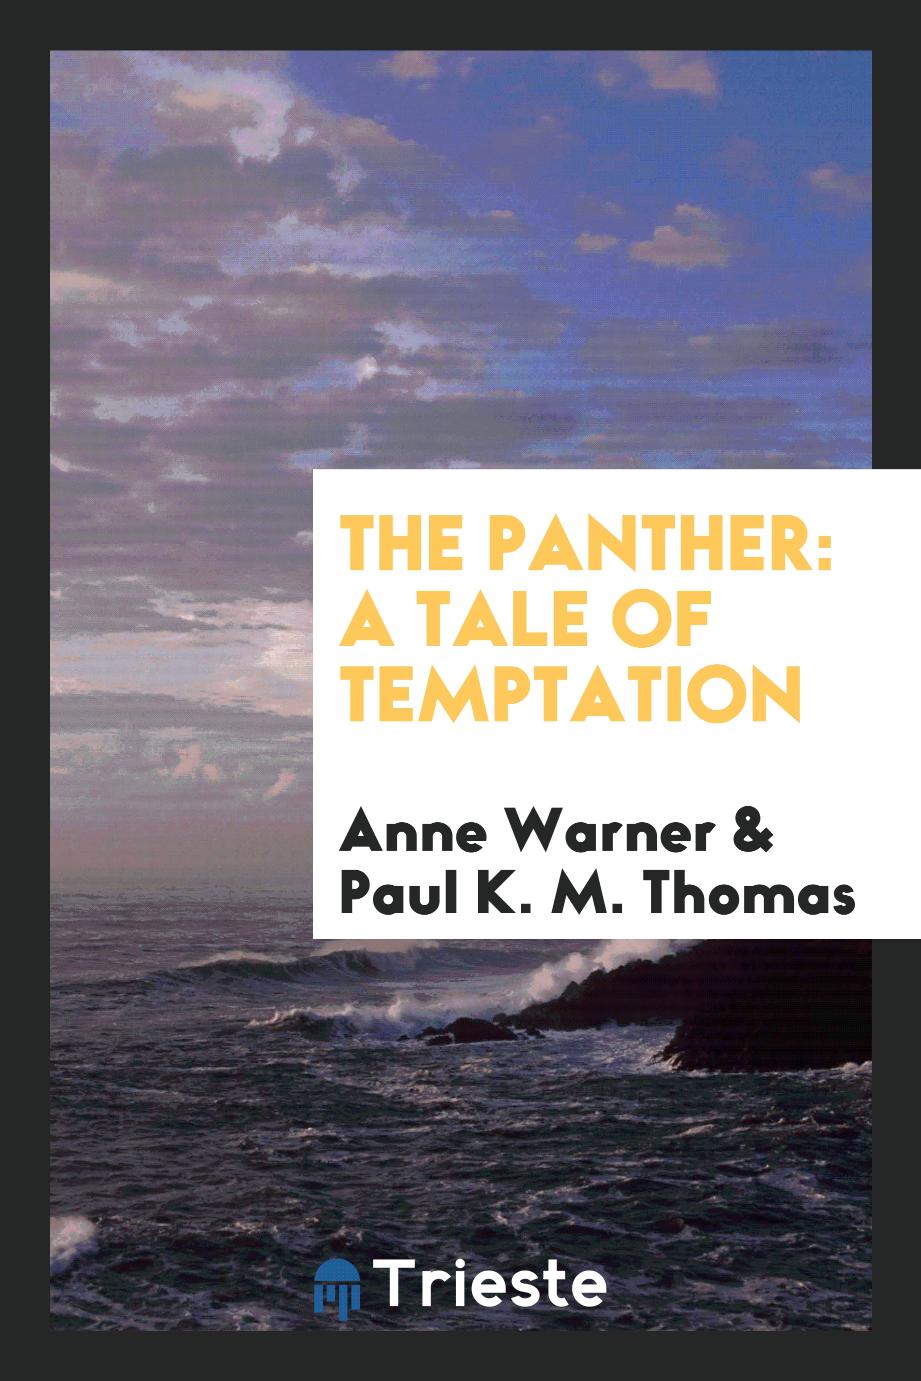 The Panther: A Tale of Temptation